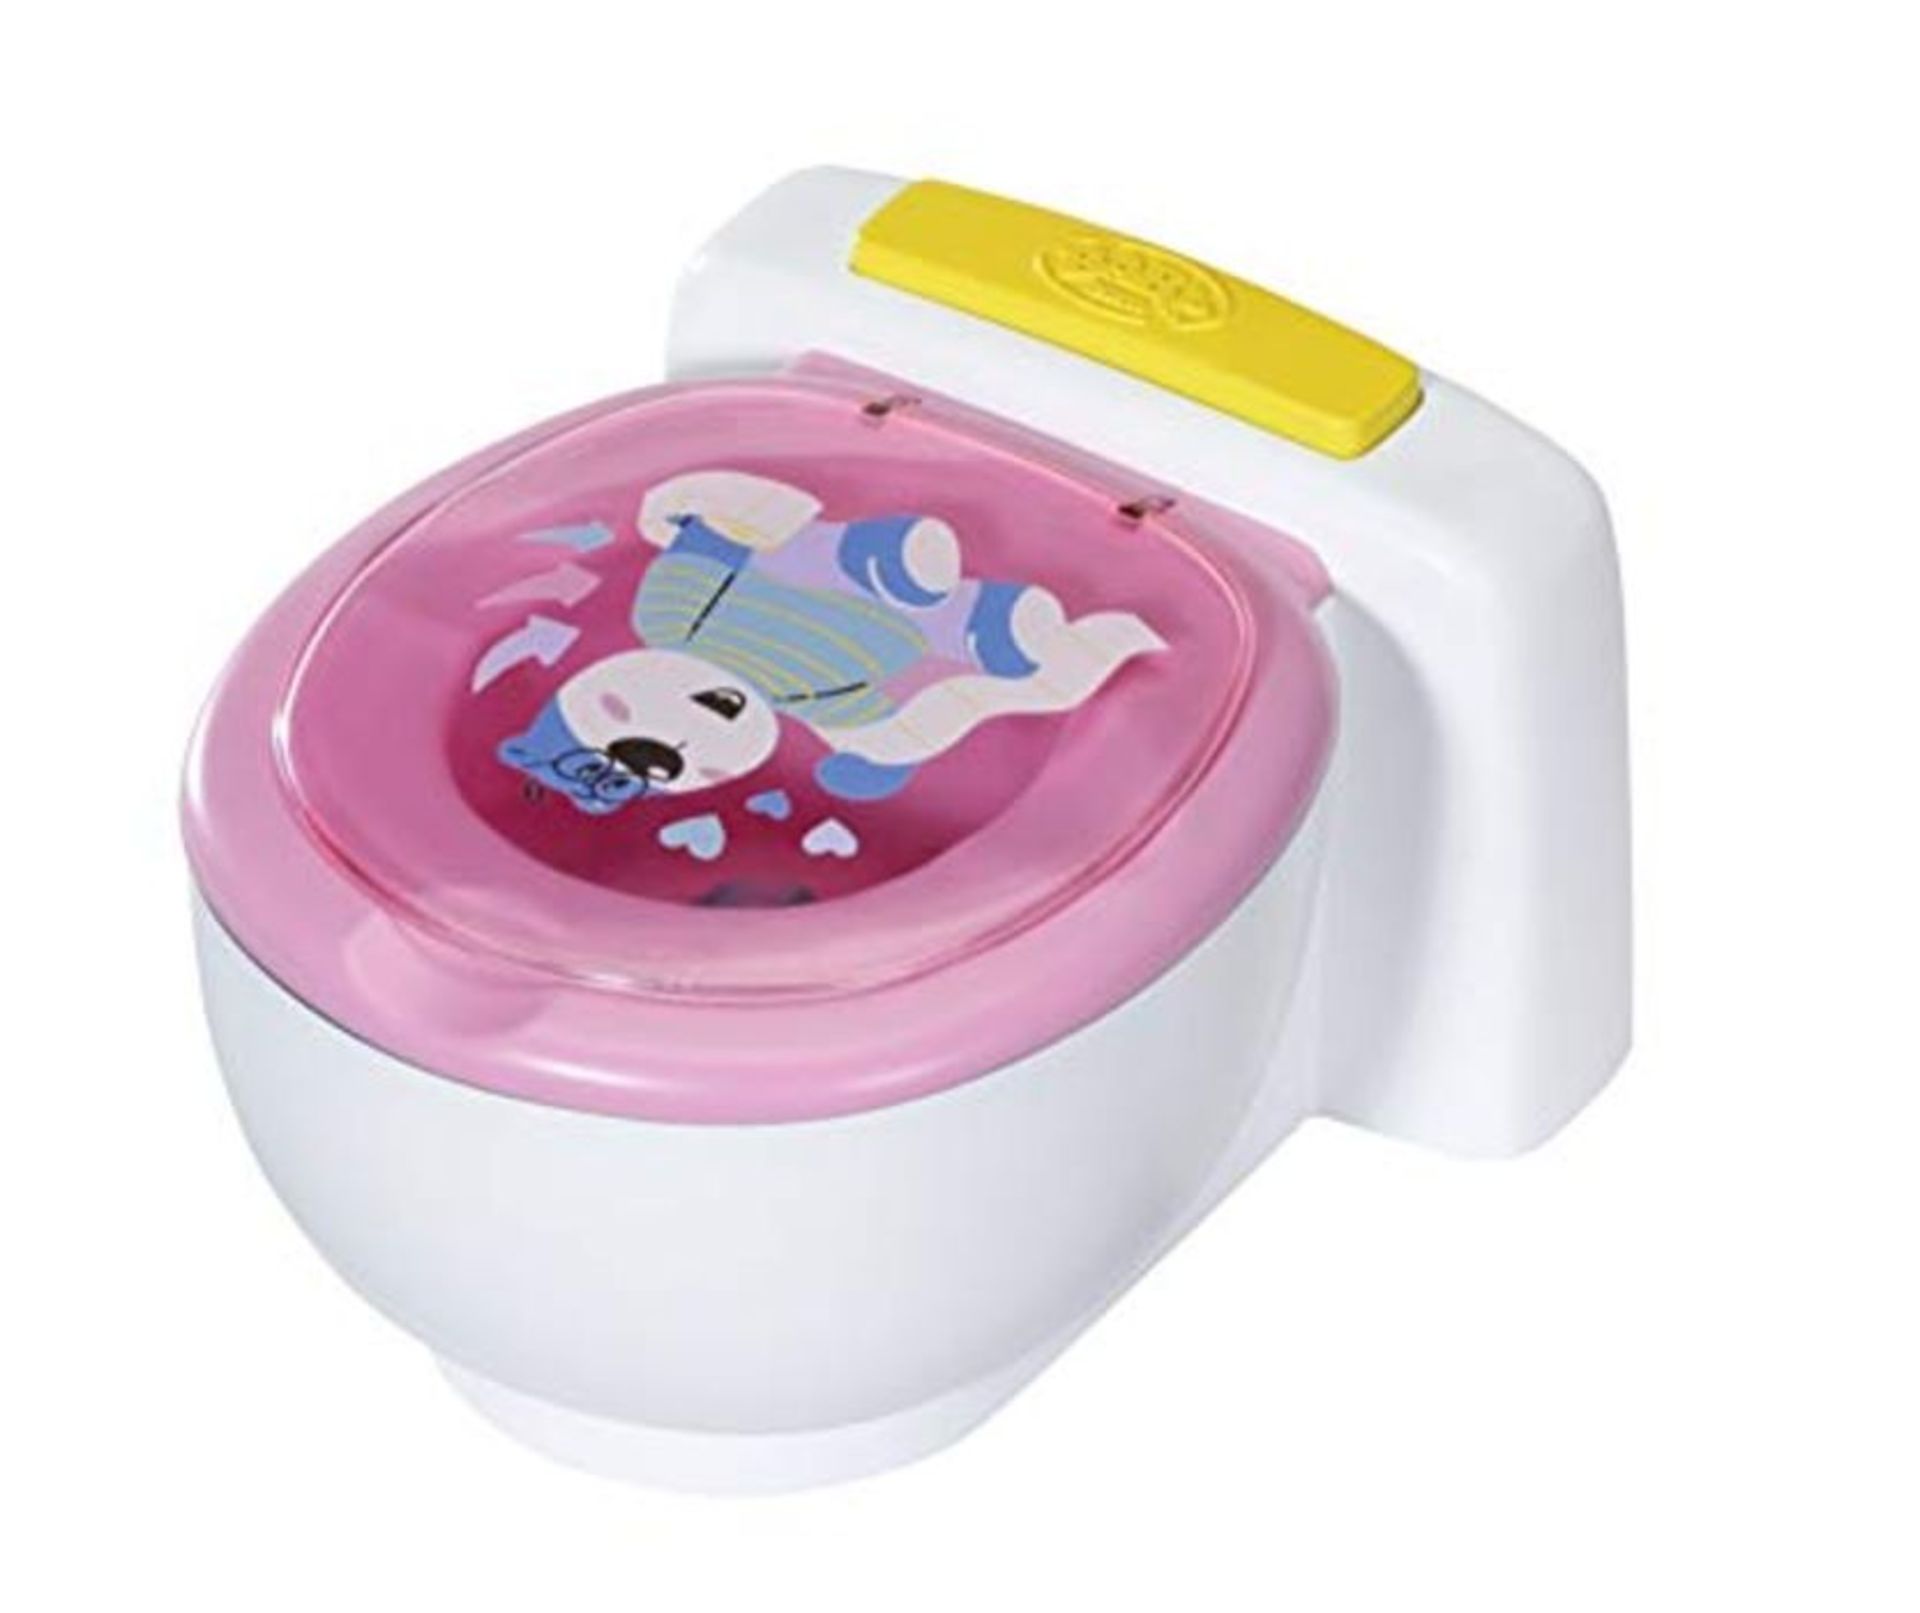 BABY born Bath Poo-Poo Toilet - Real Sound Effects - For Small Hands - Rainbow Glitter